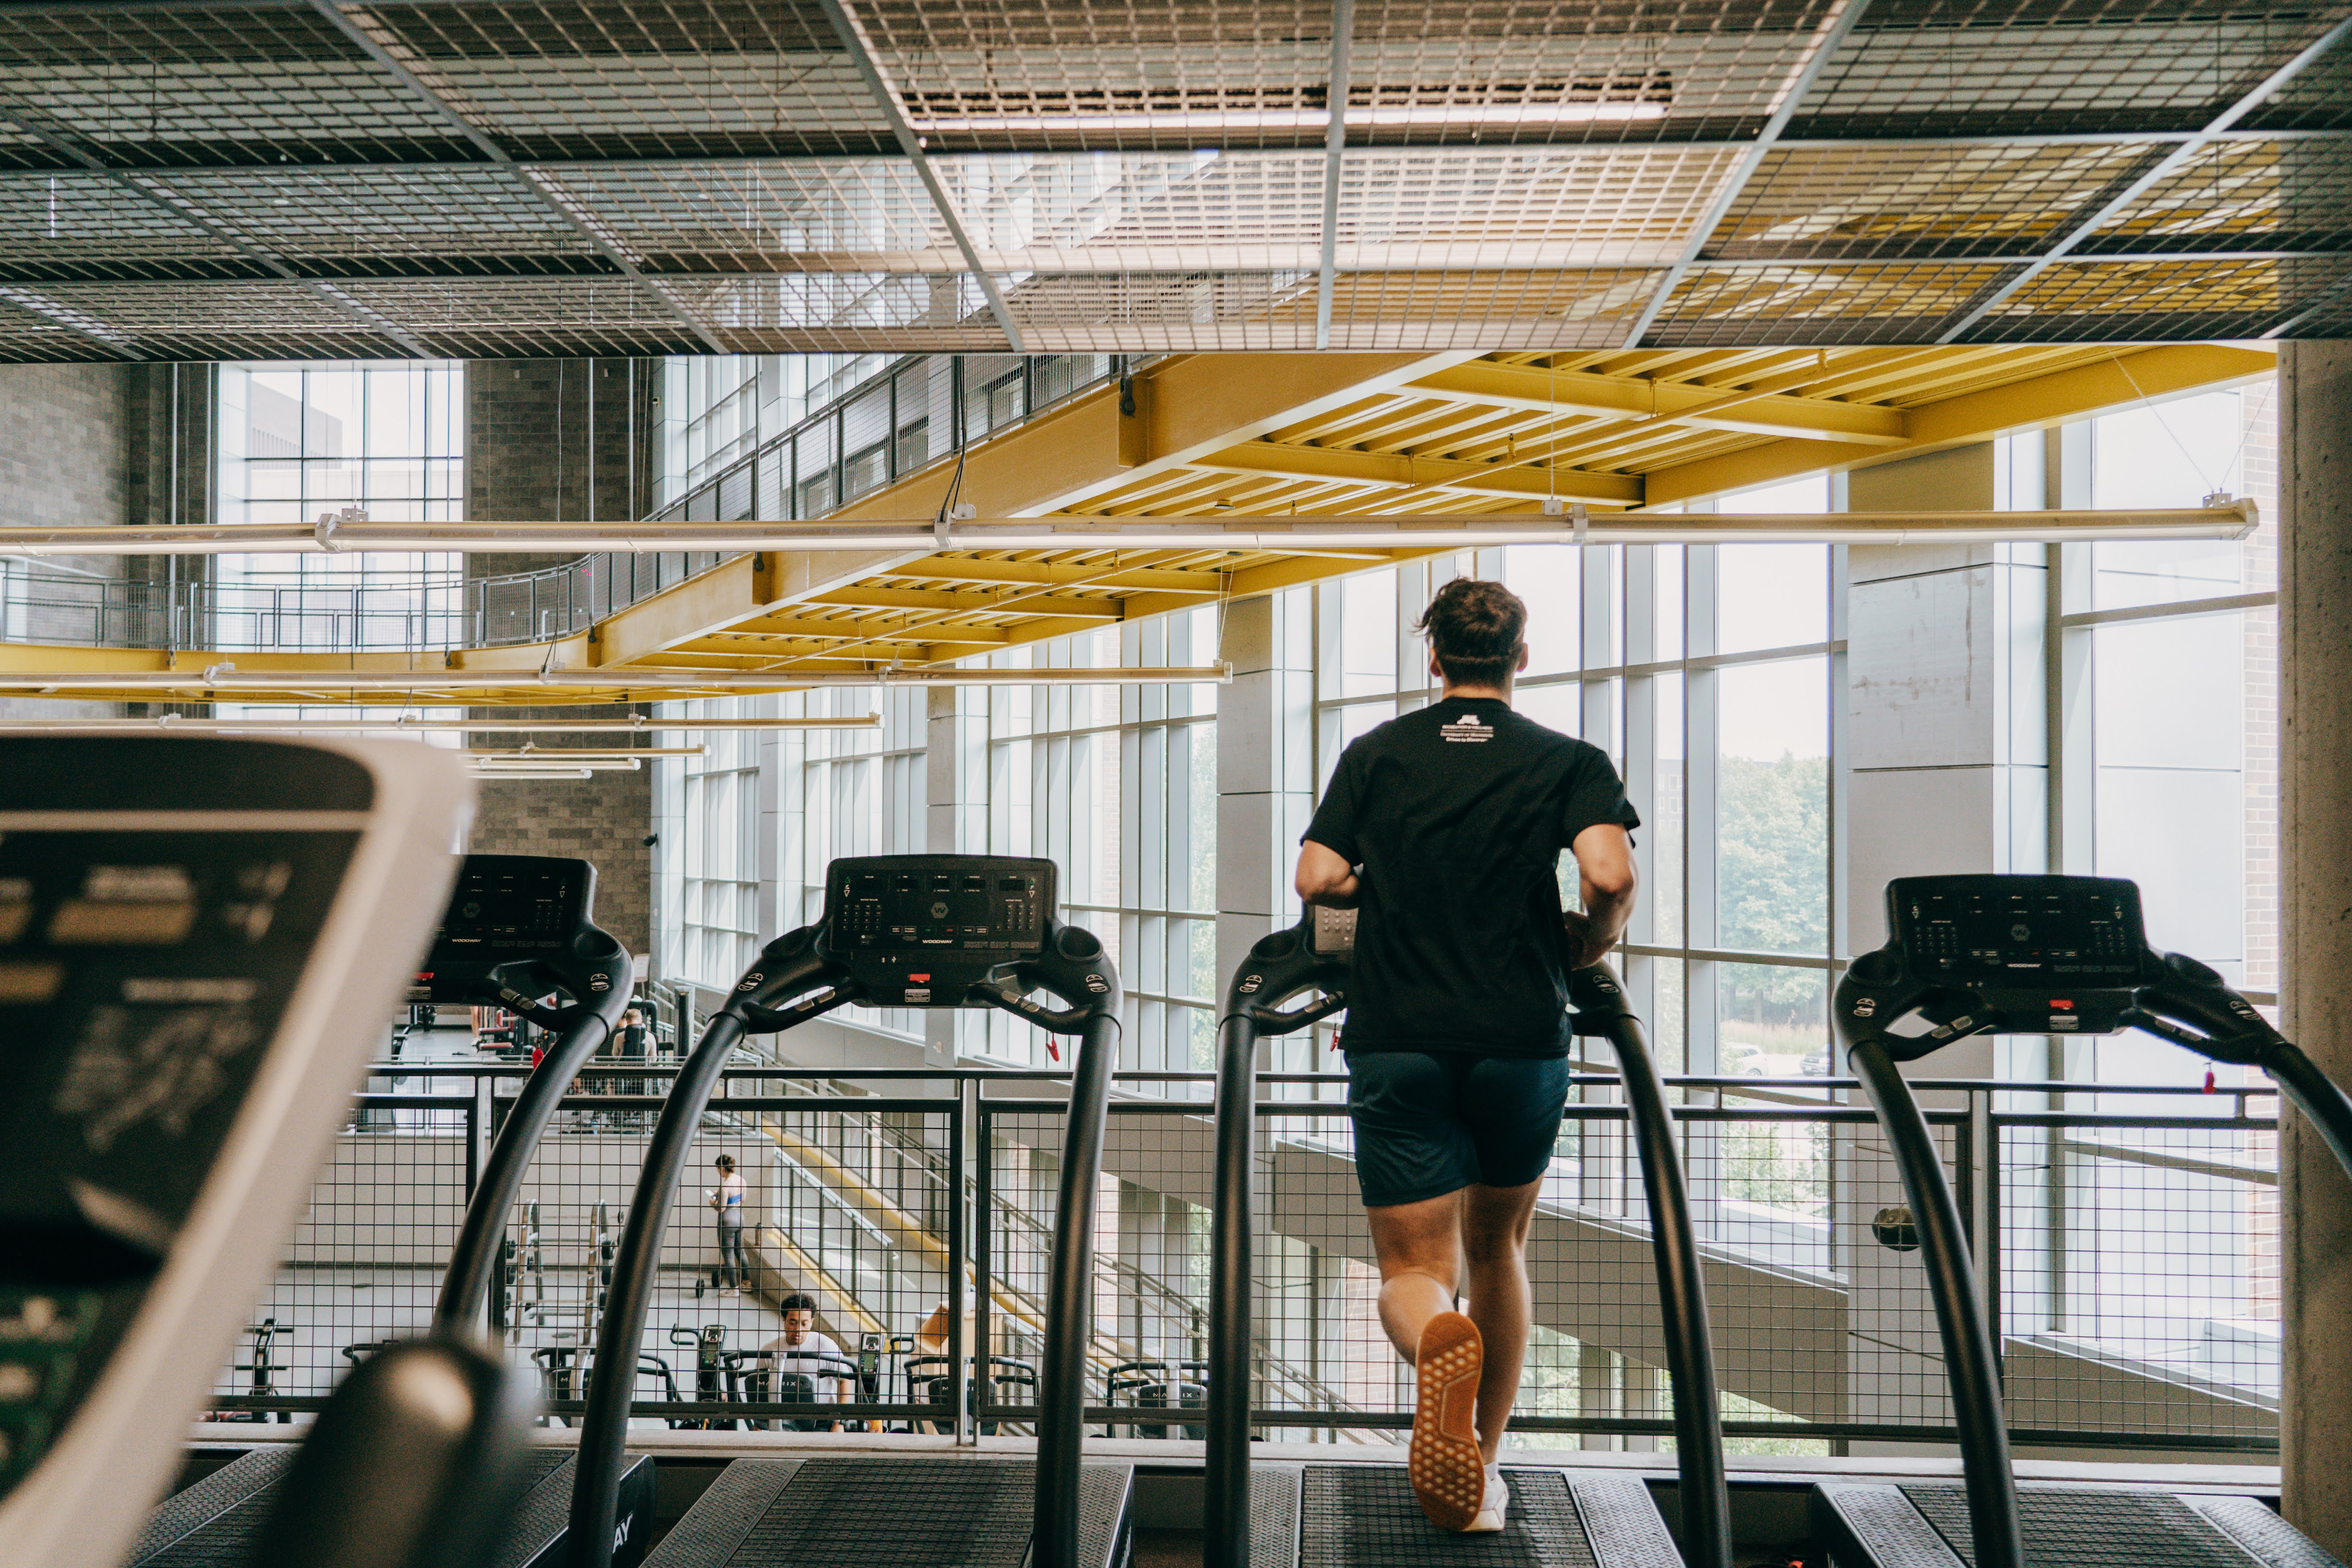 student running on treadmill over looking facility